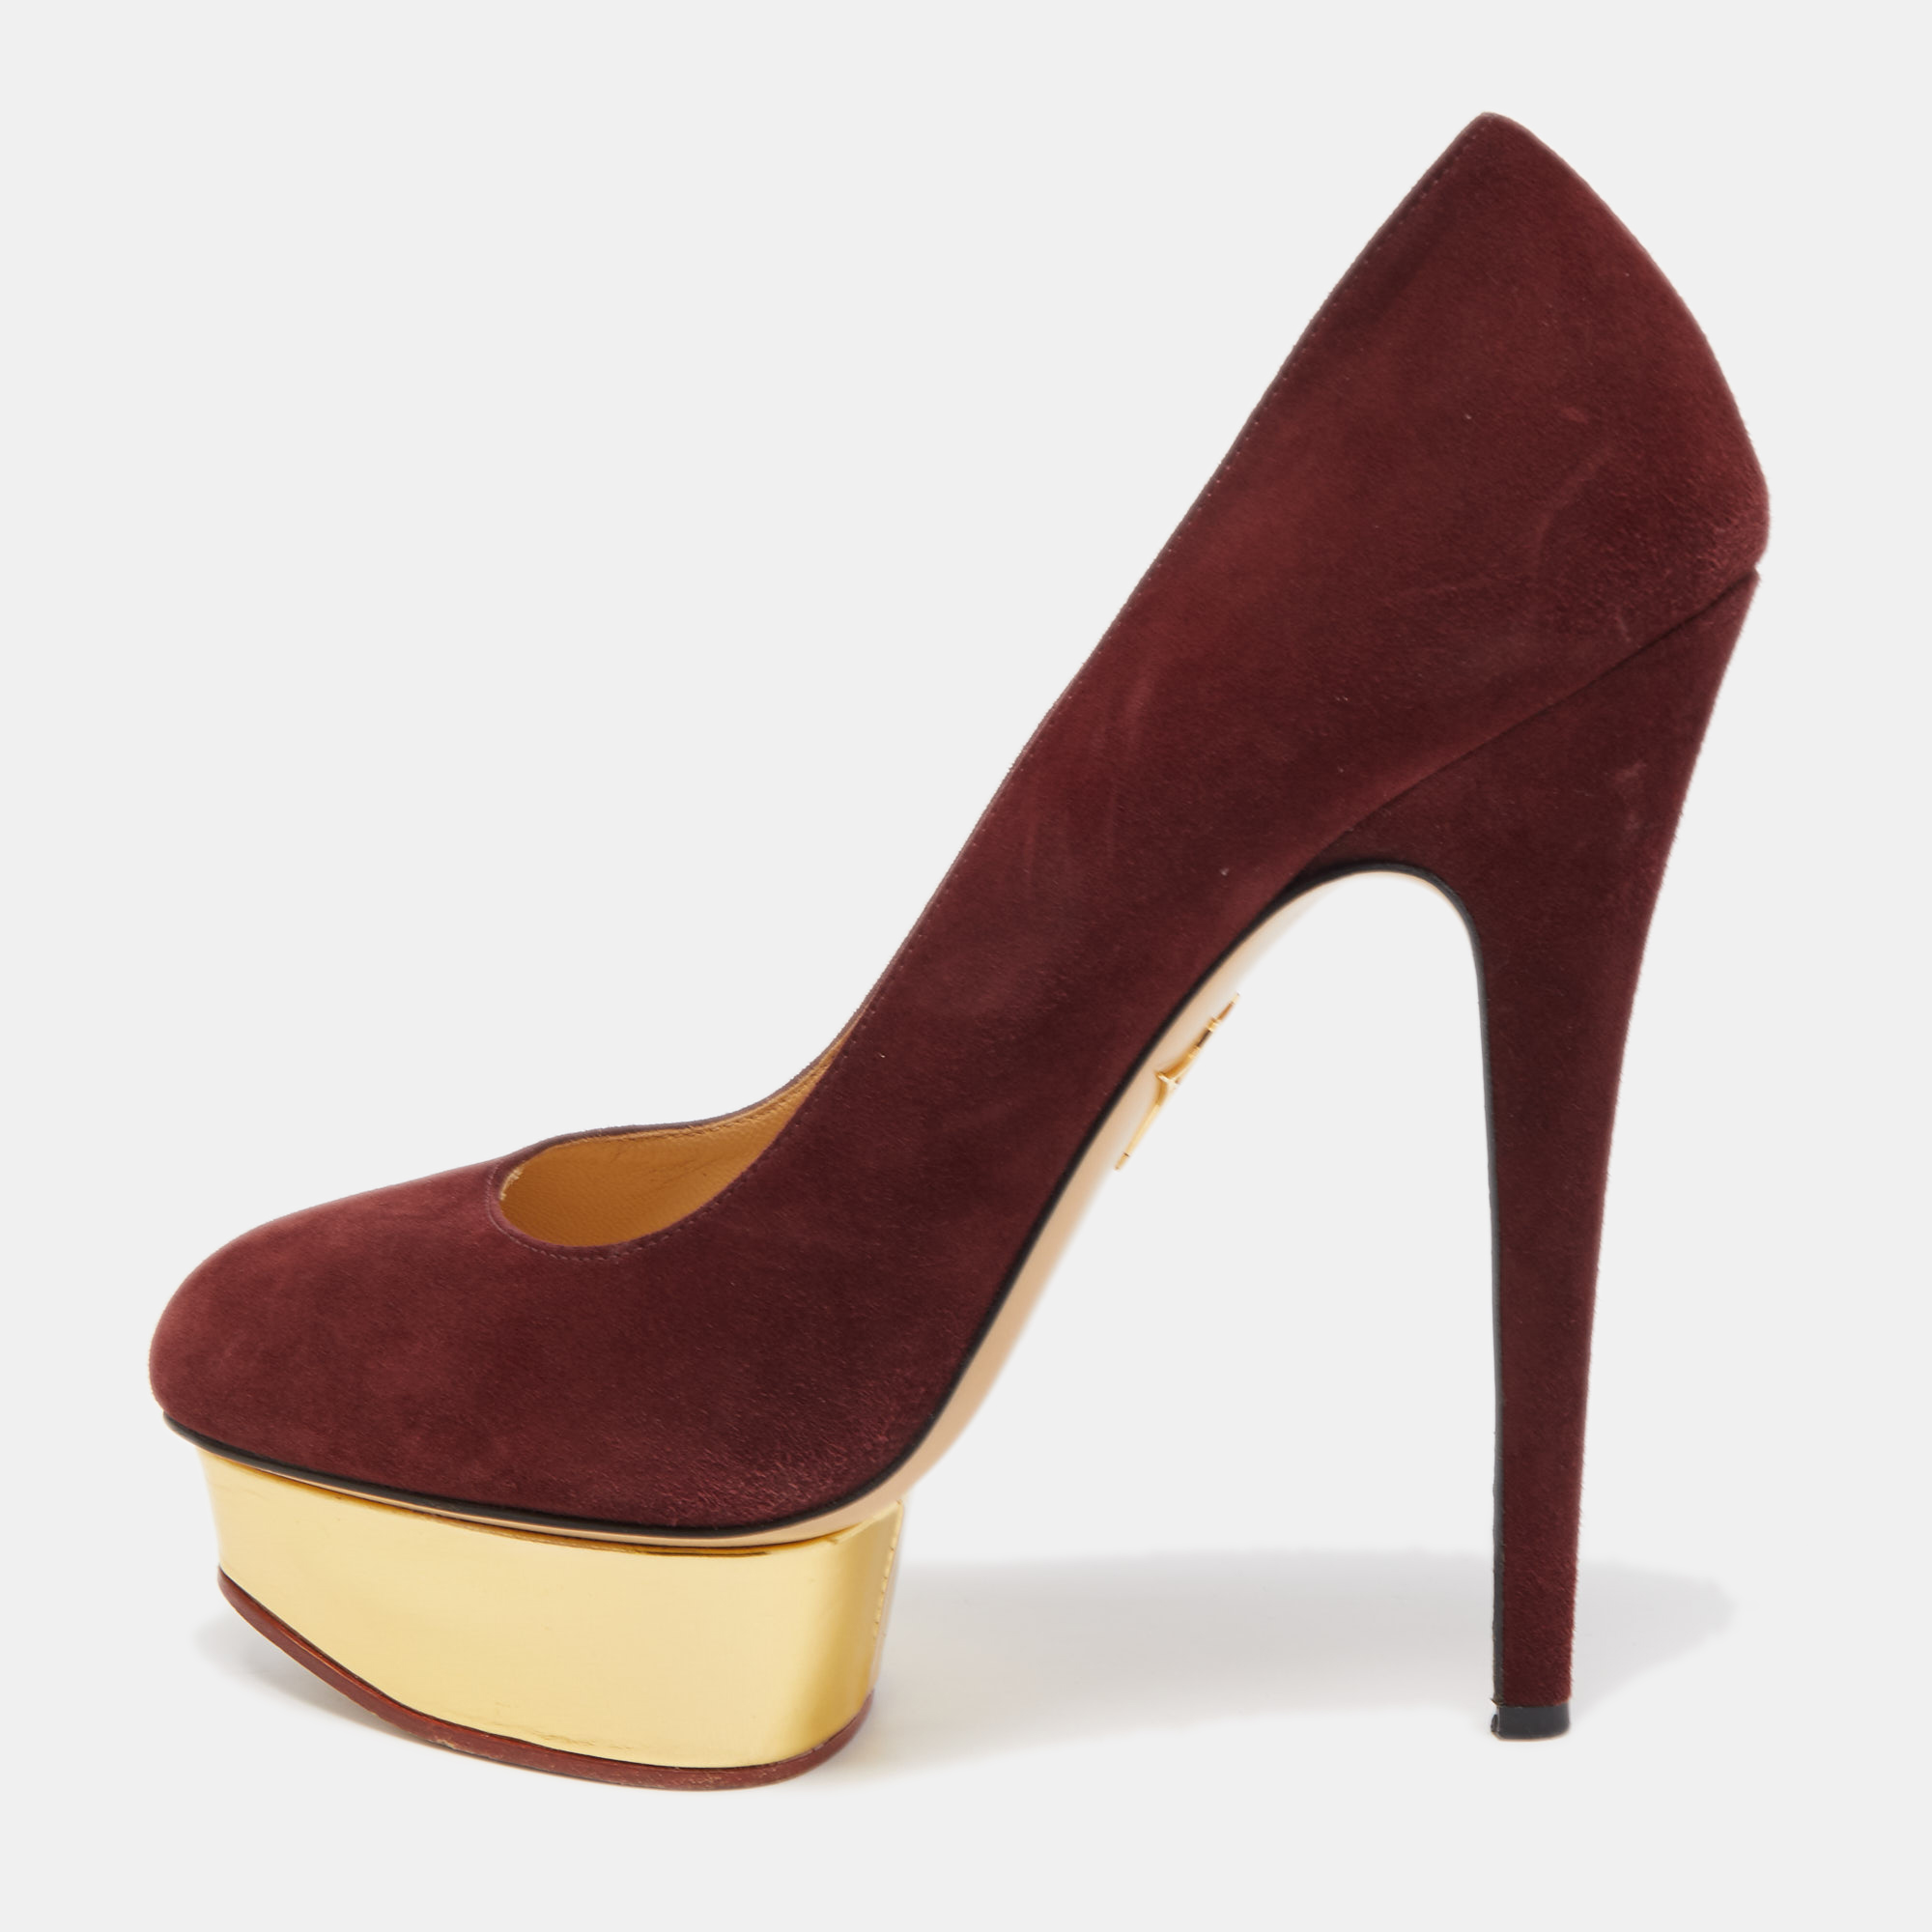 Charlotte Olympia Burgundy Suede Dolly Platform Pumps Size 40